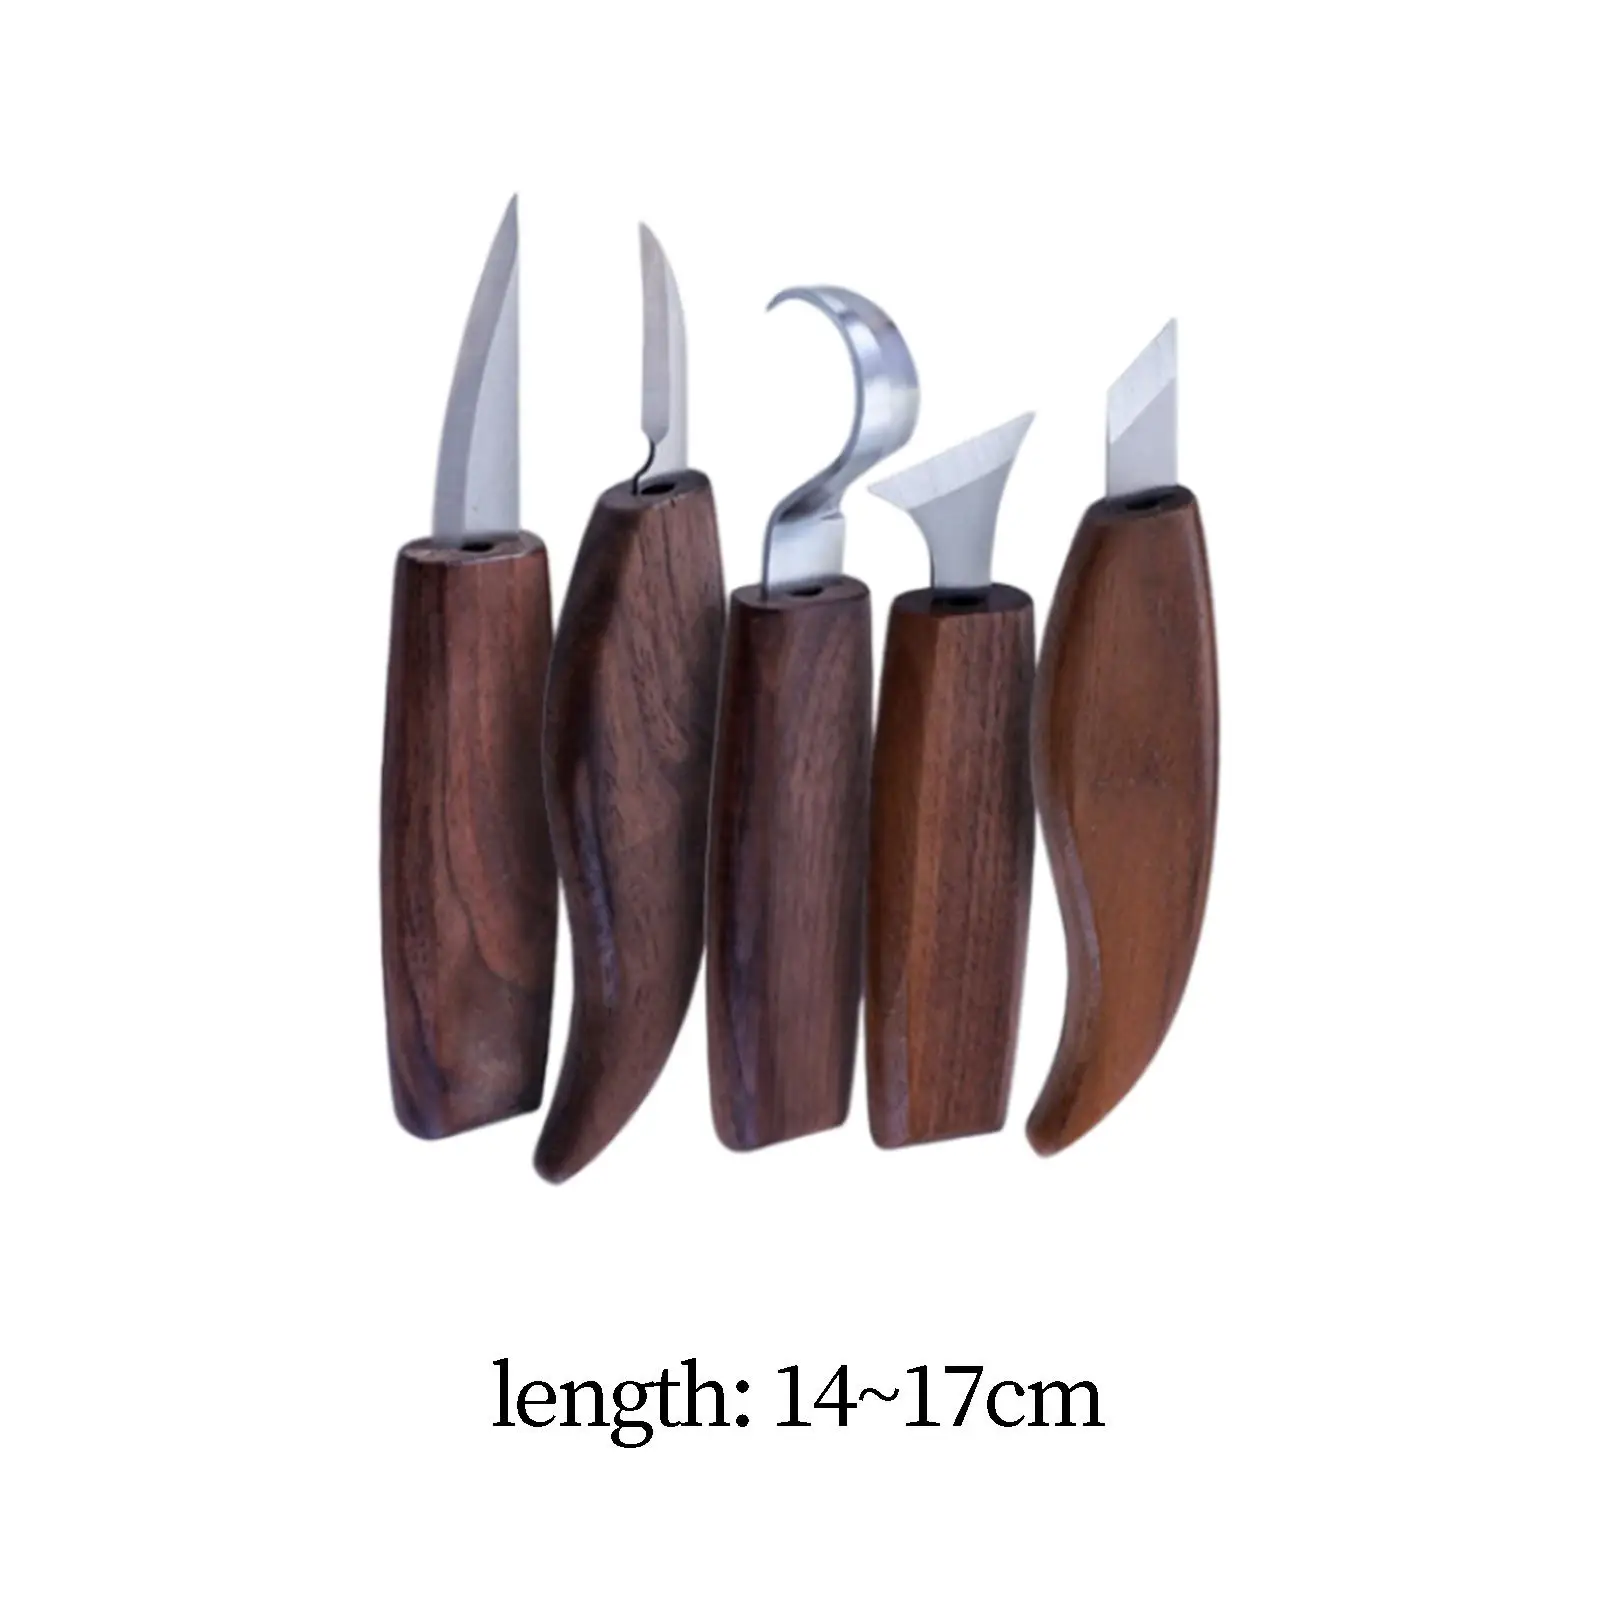 8x Woodworking DIY Carving Tool Wear Resistant Durable Wood Carving Tools for Handmade Wood Carving Plaster Carving Kids Adults